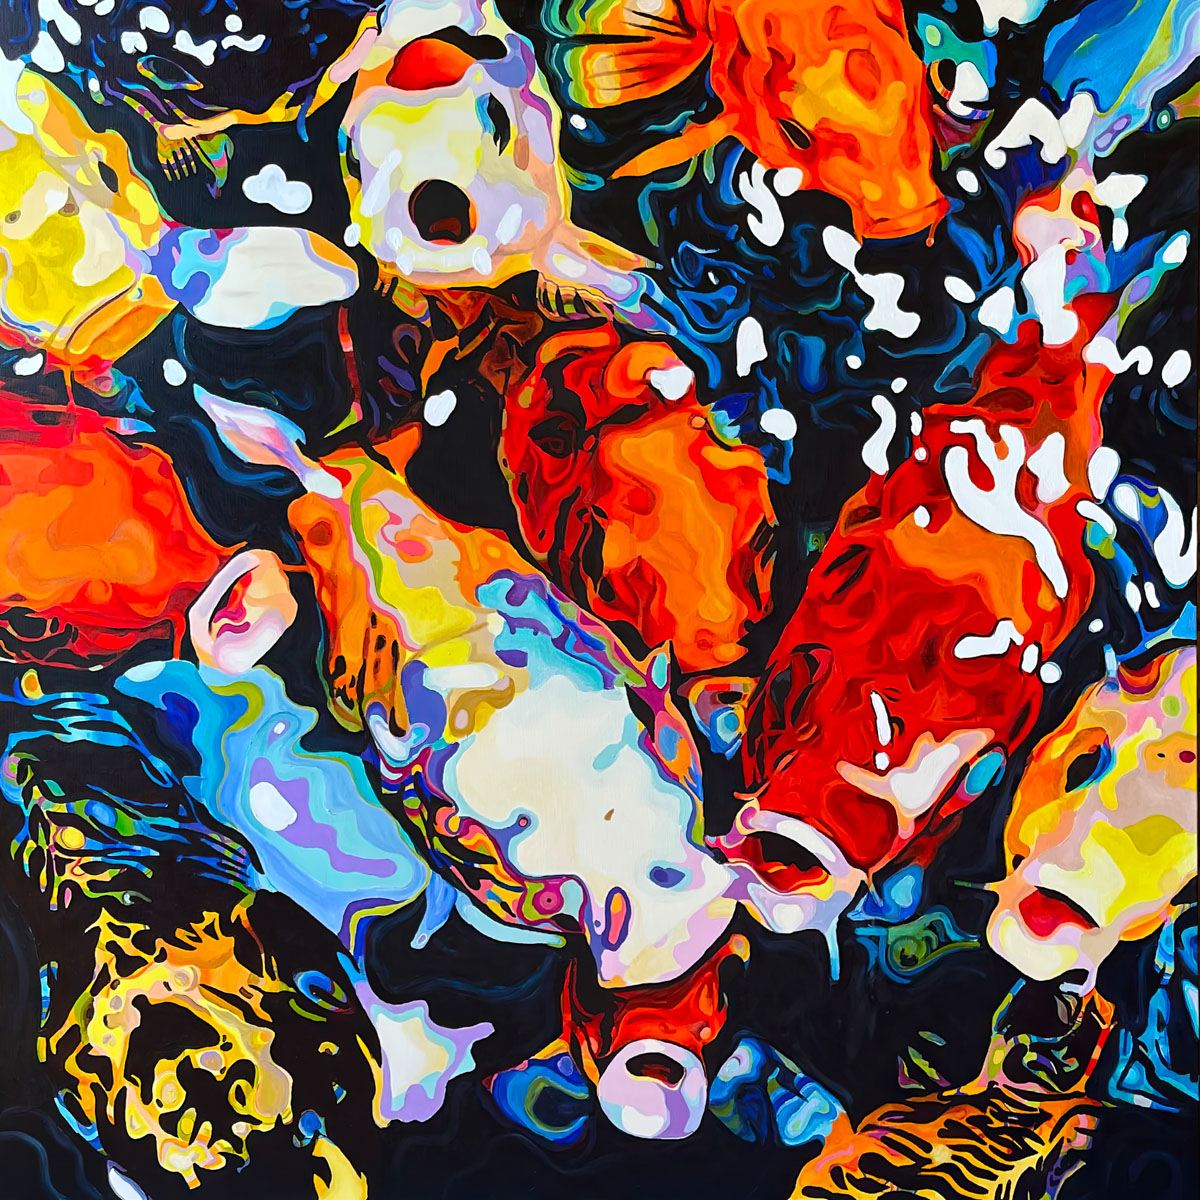 Painting of koi under water - Fethers Studio